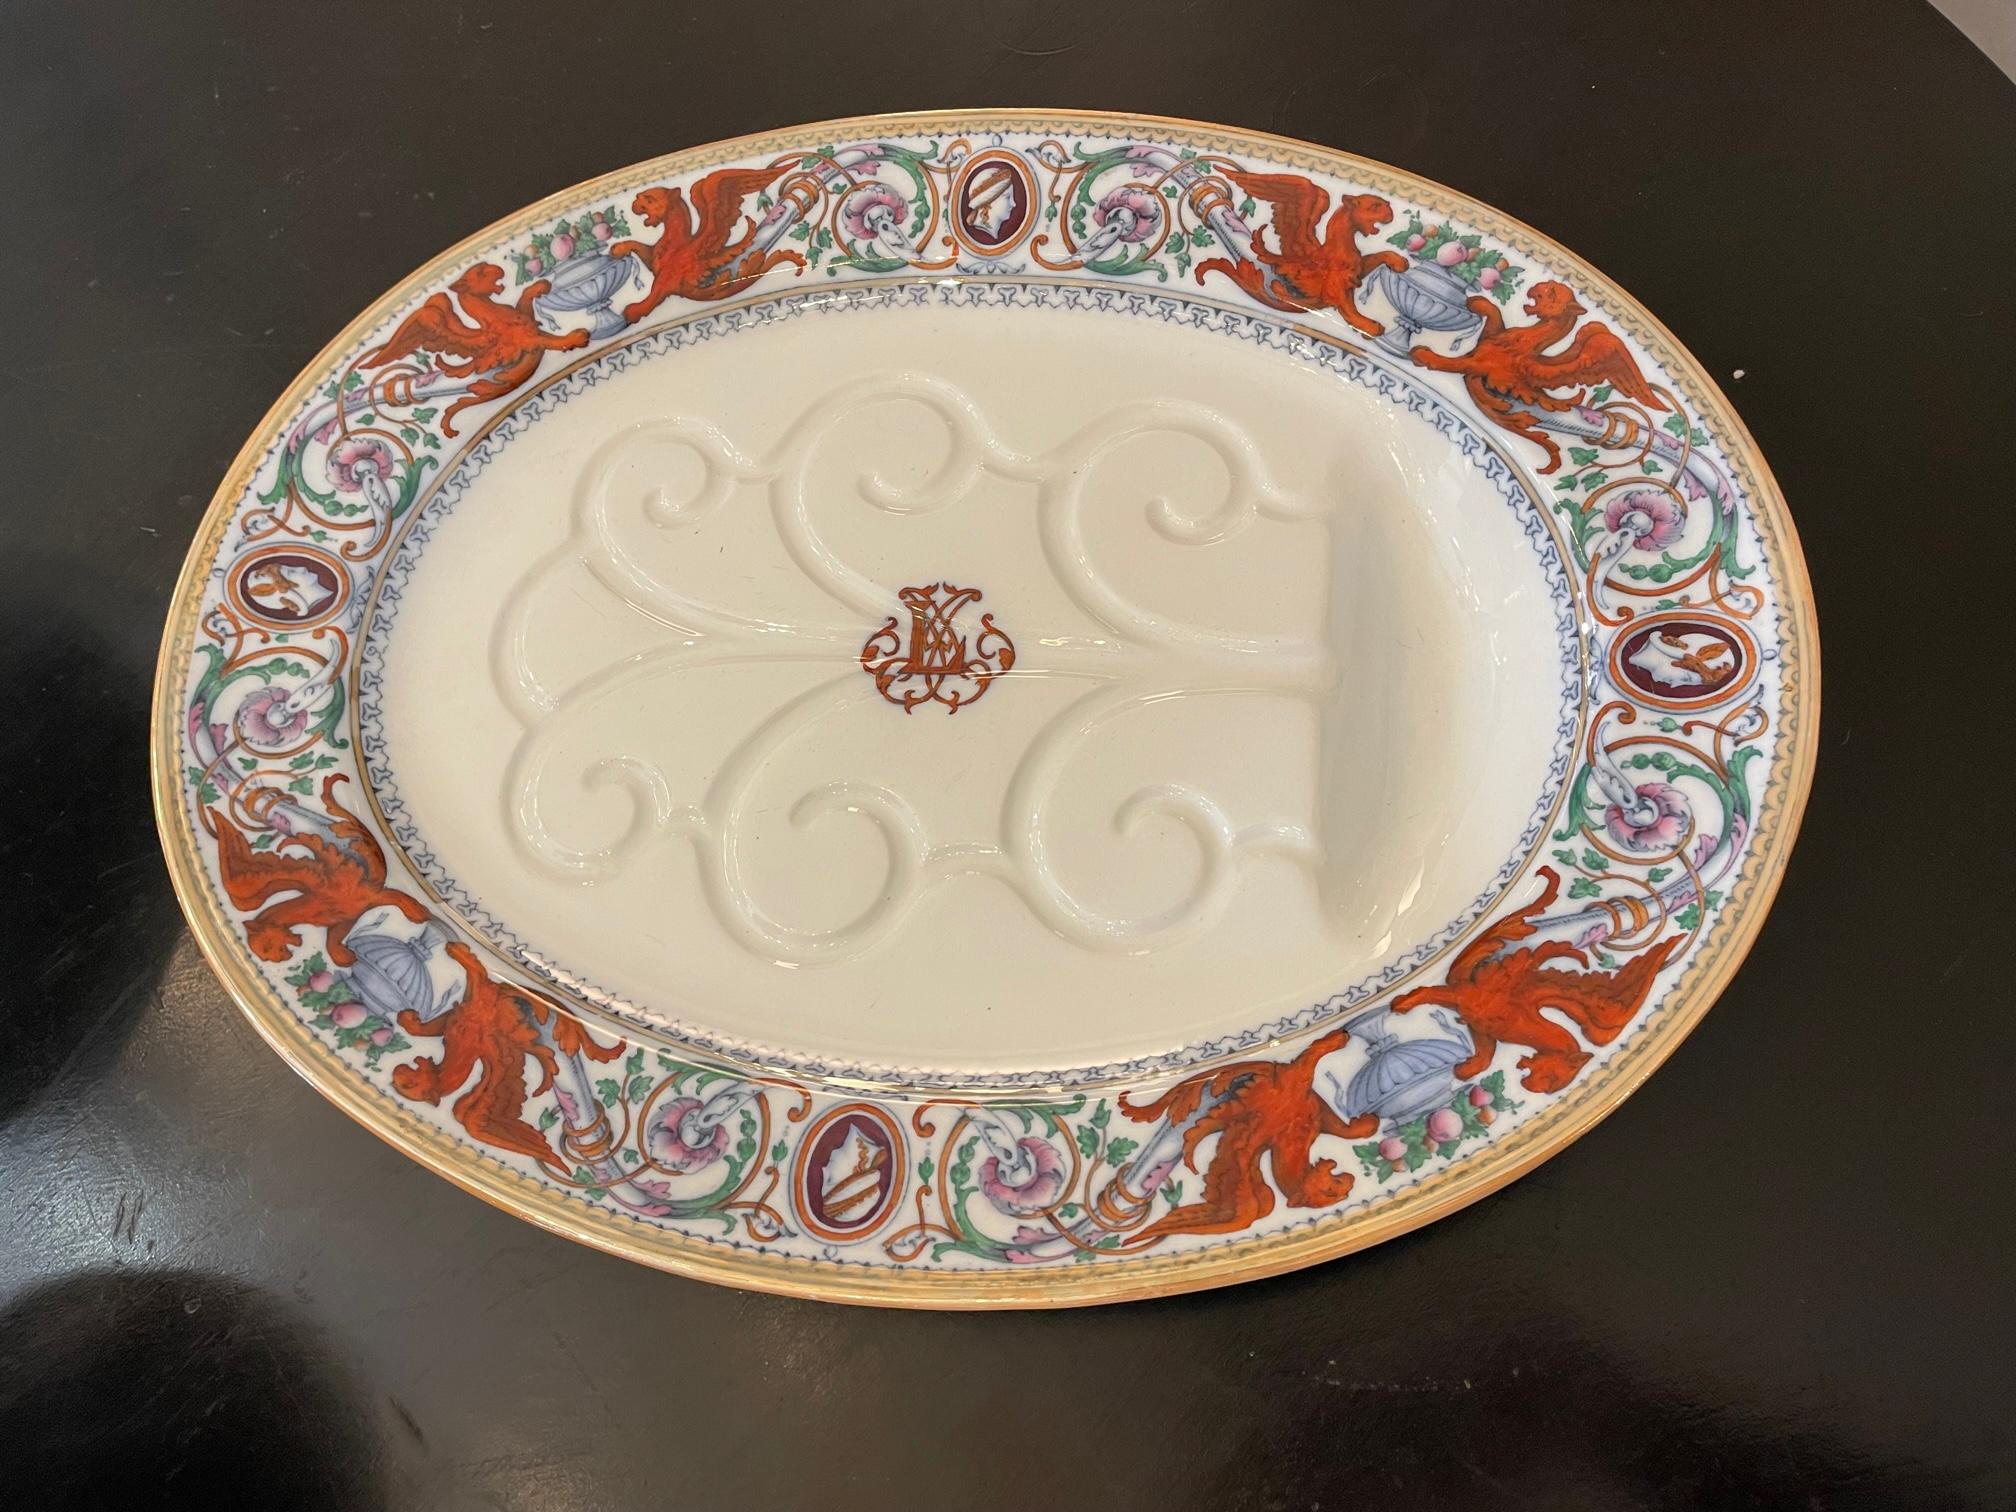 Beautiful 19th century English Minton Porcelain set of two compotes and a platter. 
